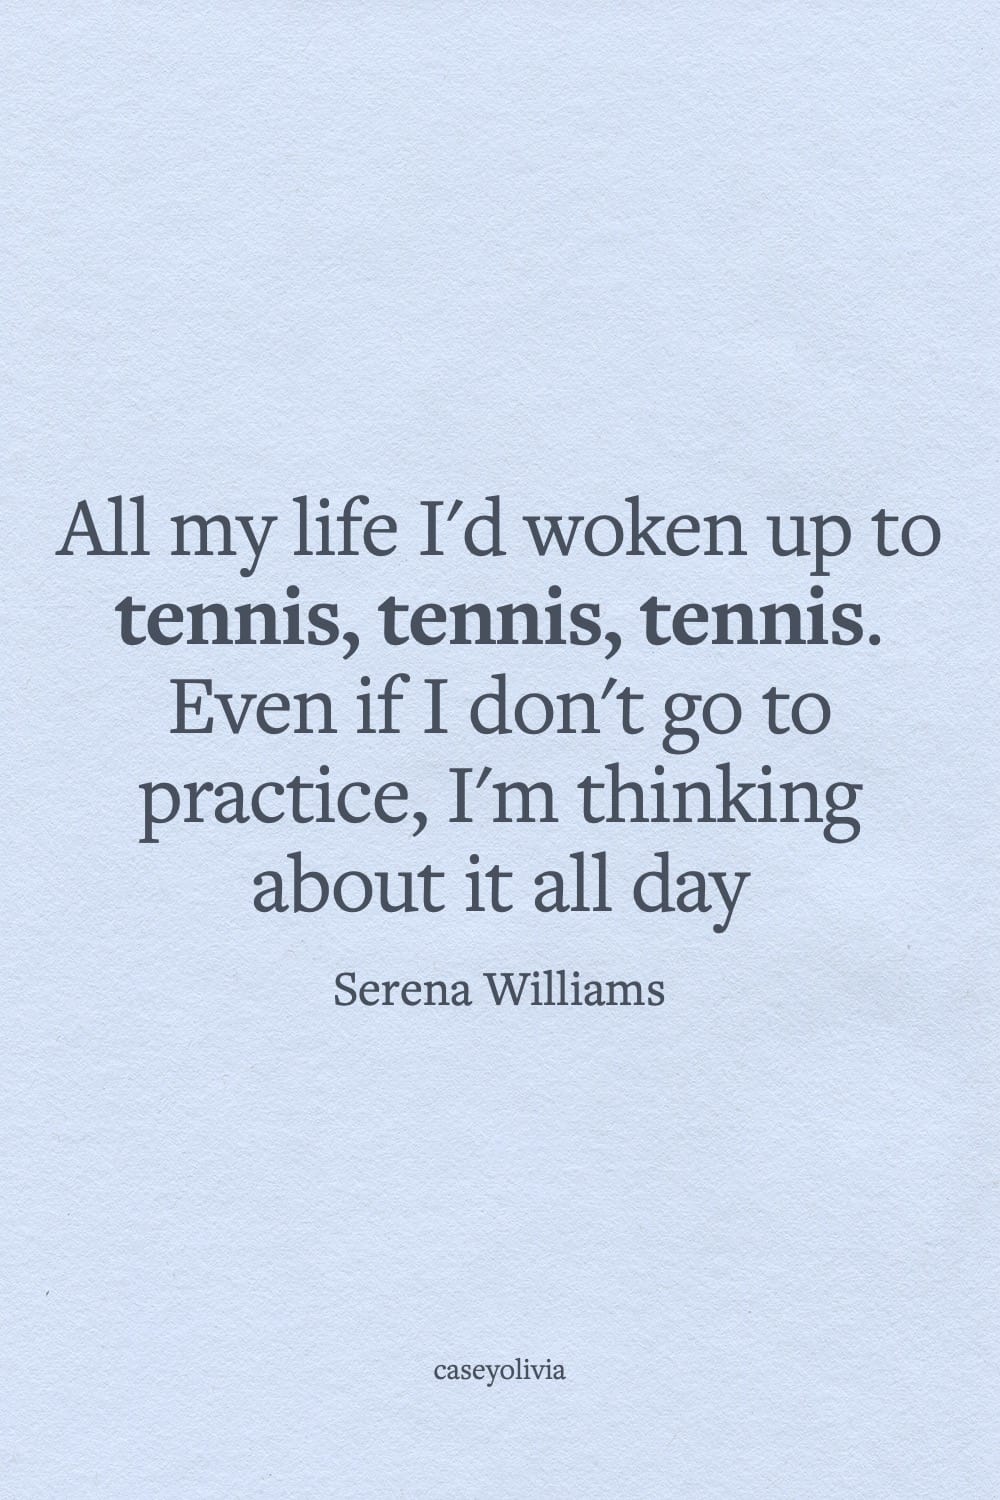 serena williams thinking about tennis all day long